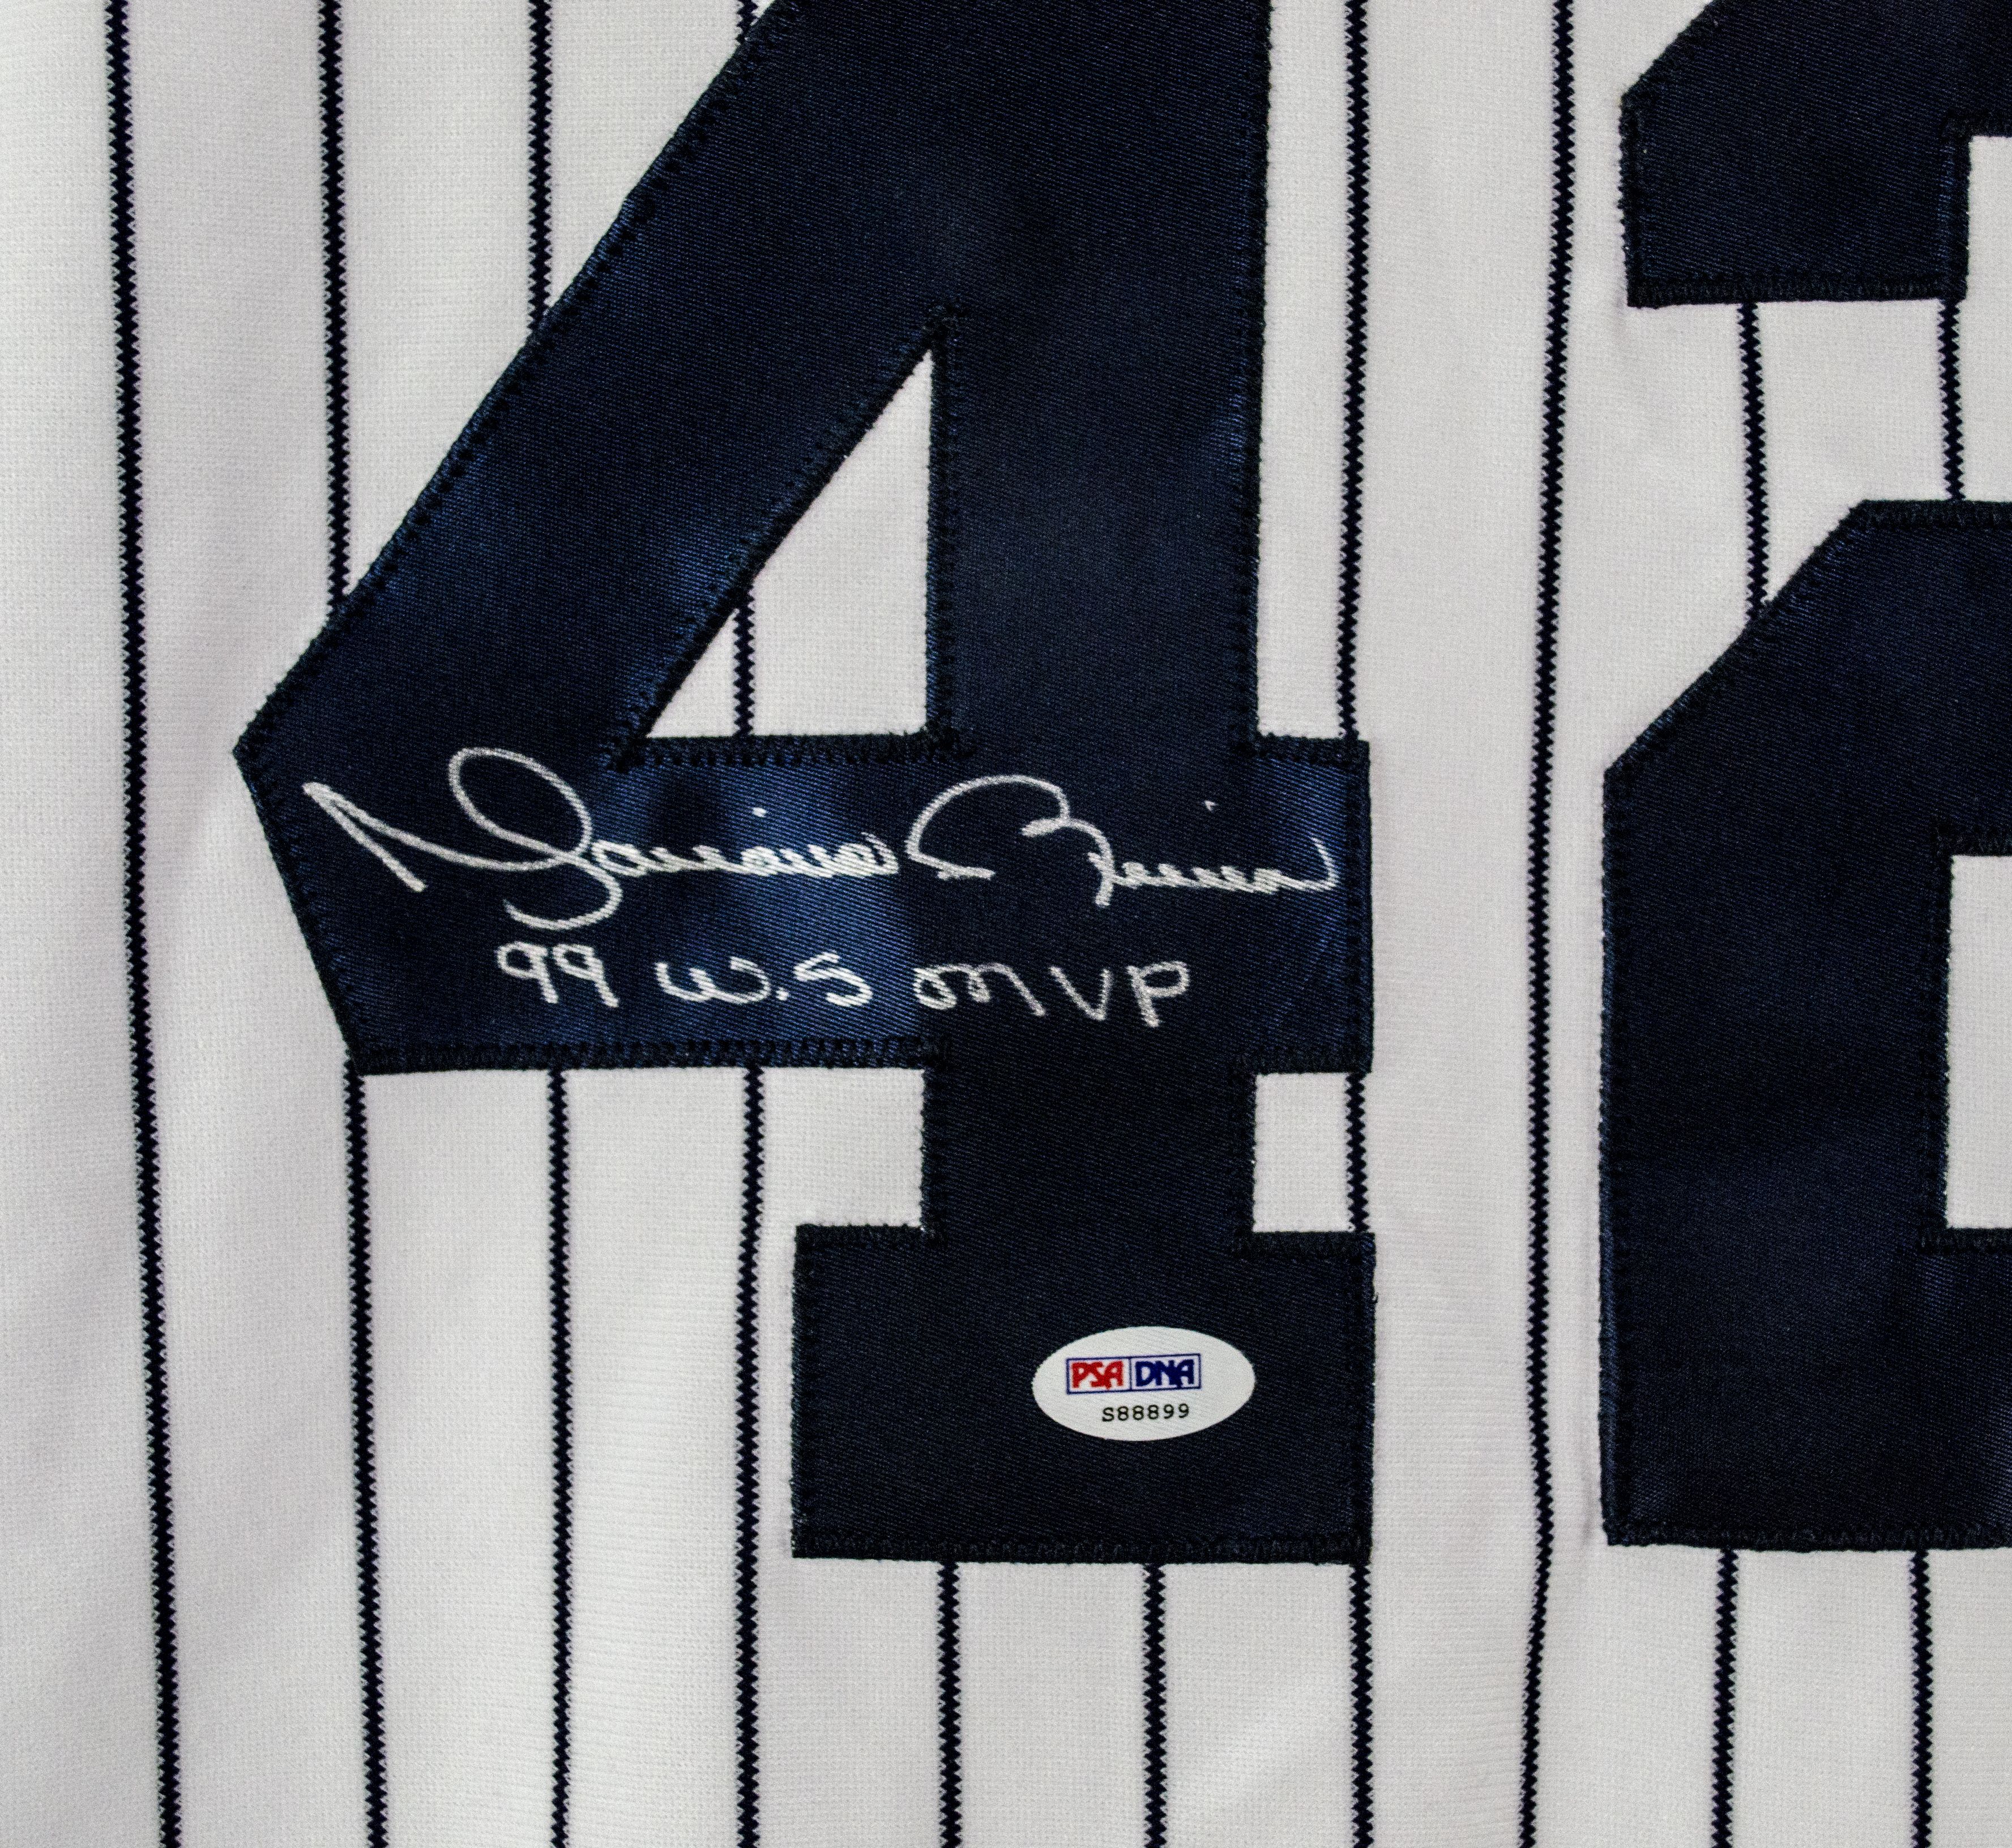 mariano rivera autographed jersey